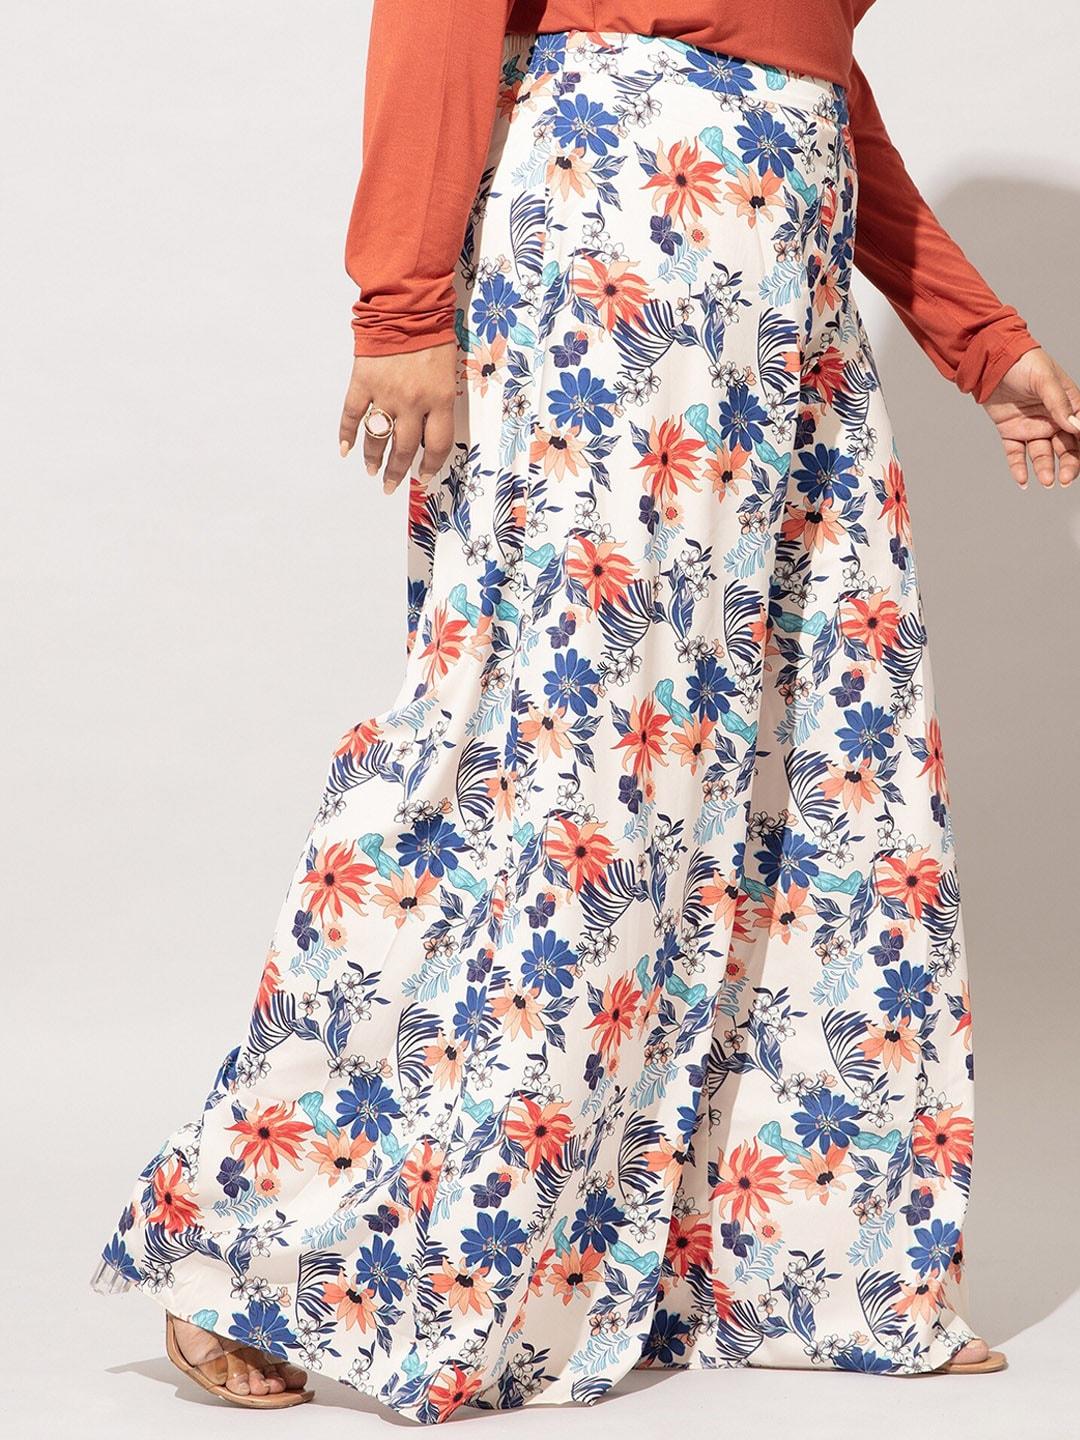 20dresses-women-off-white-floral-printed-comfort-high-rise-culottes-trousers